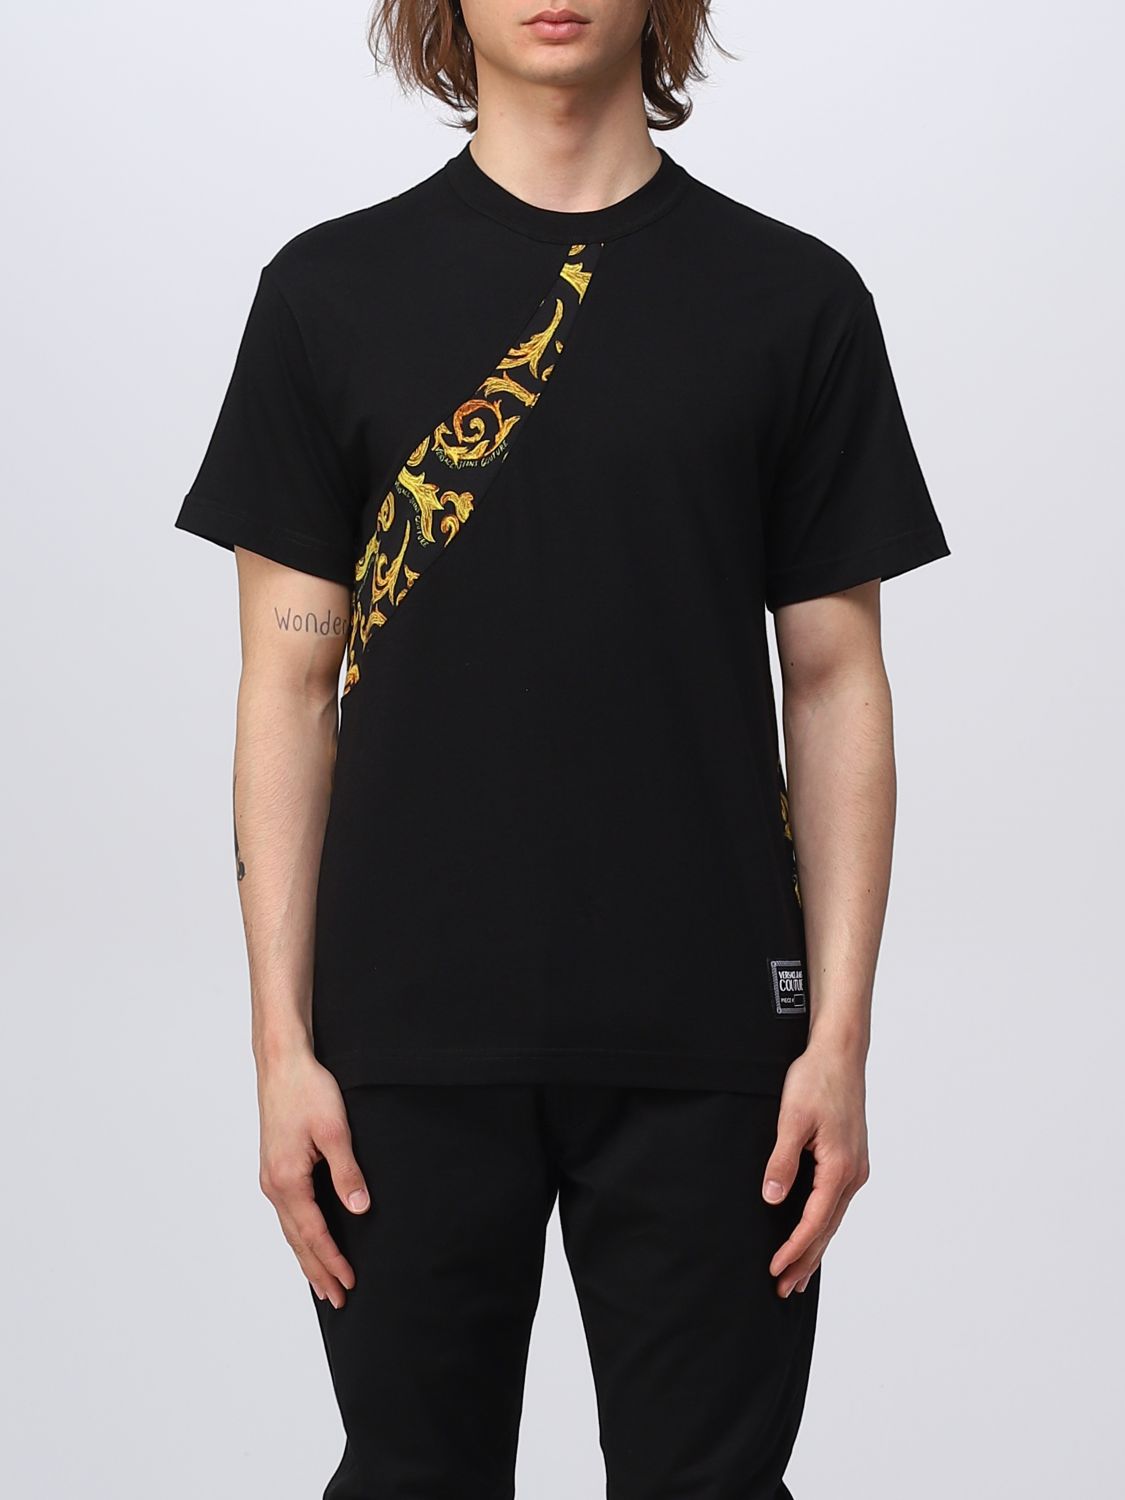 Versace Jeans Couture Cotton T-shirt In Black